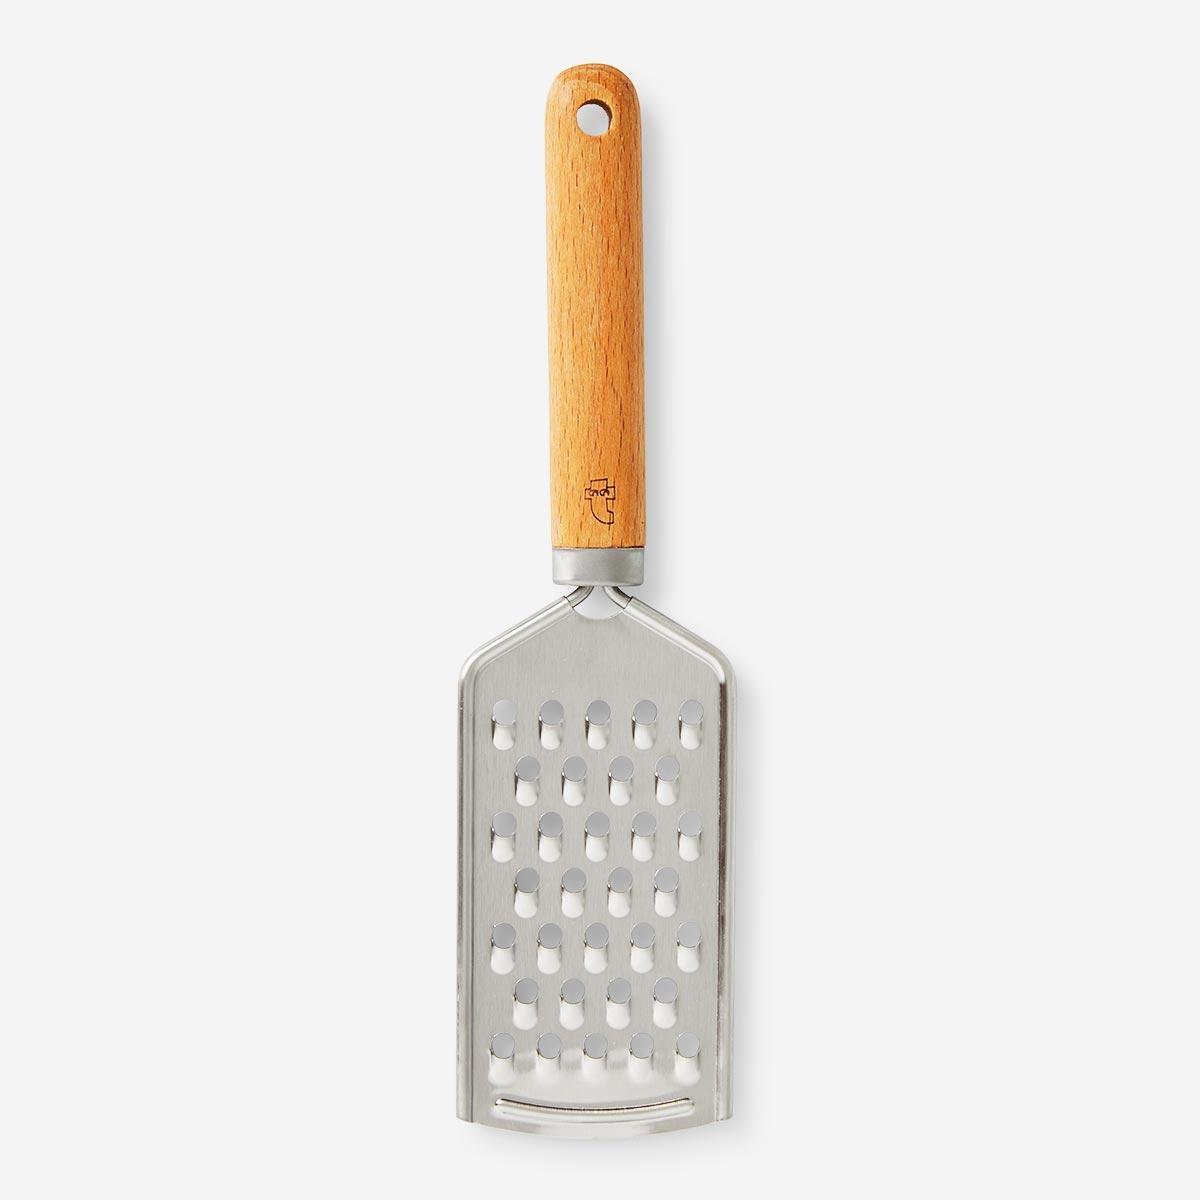 Stainless steel coarse grater.